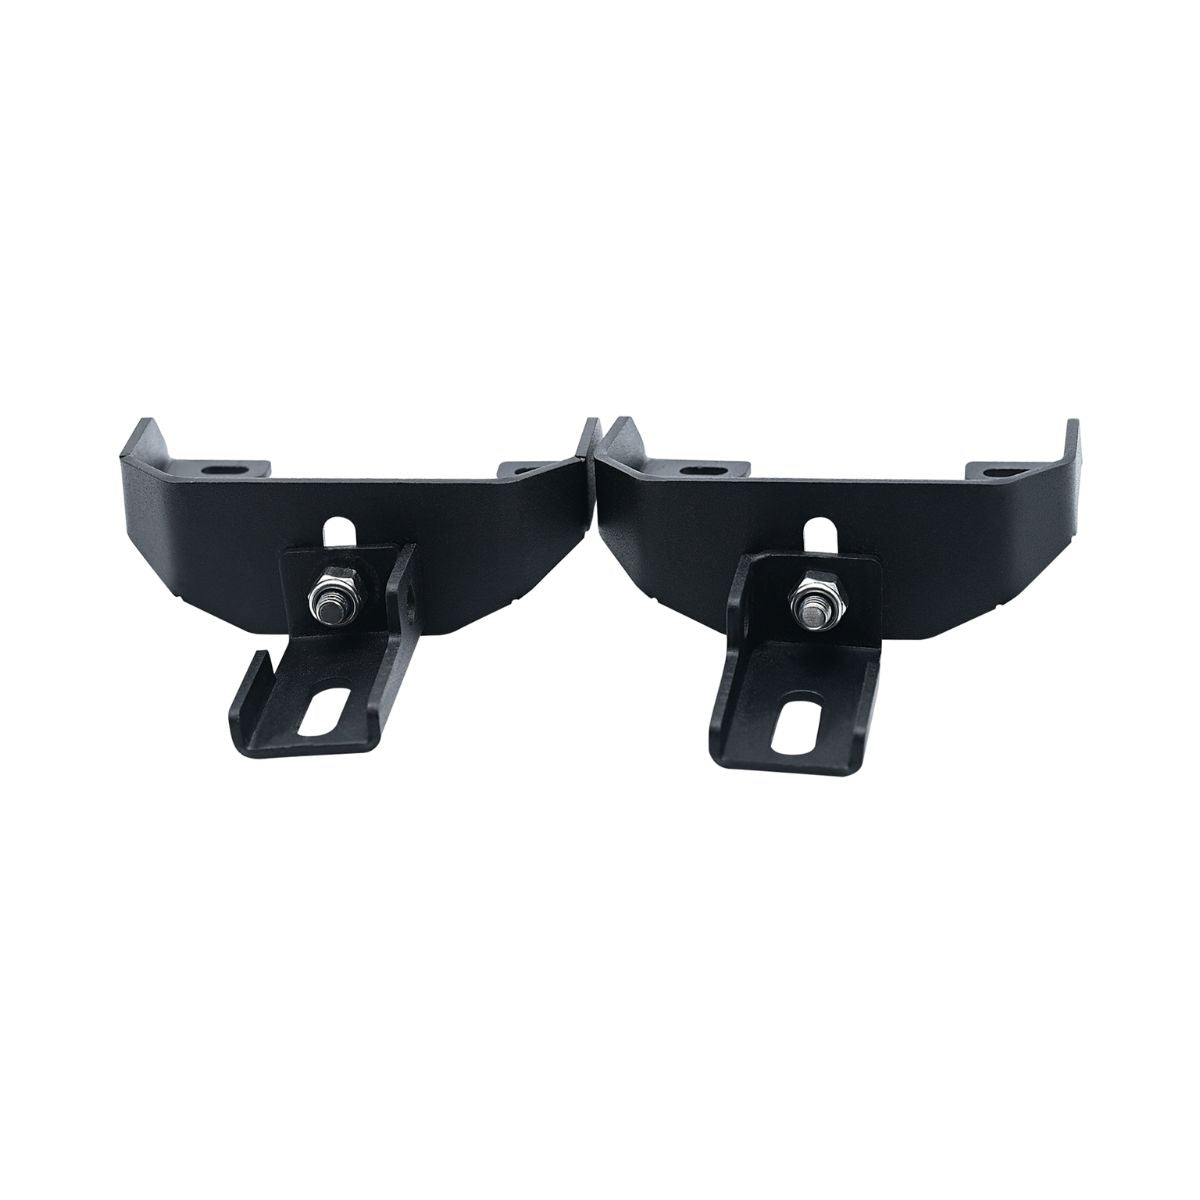 Fork Clamps for Hero Xpulse 200 3